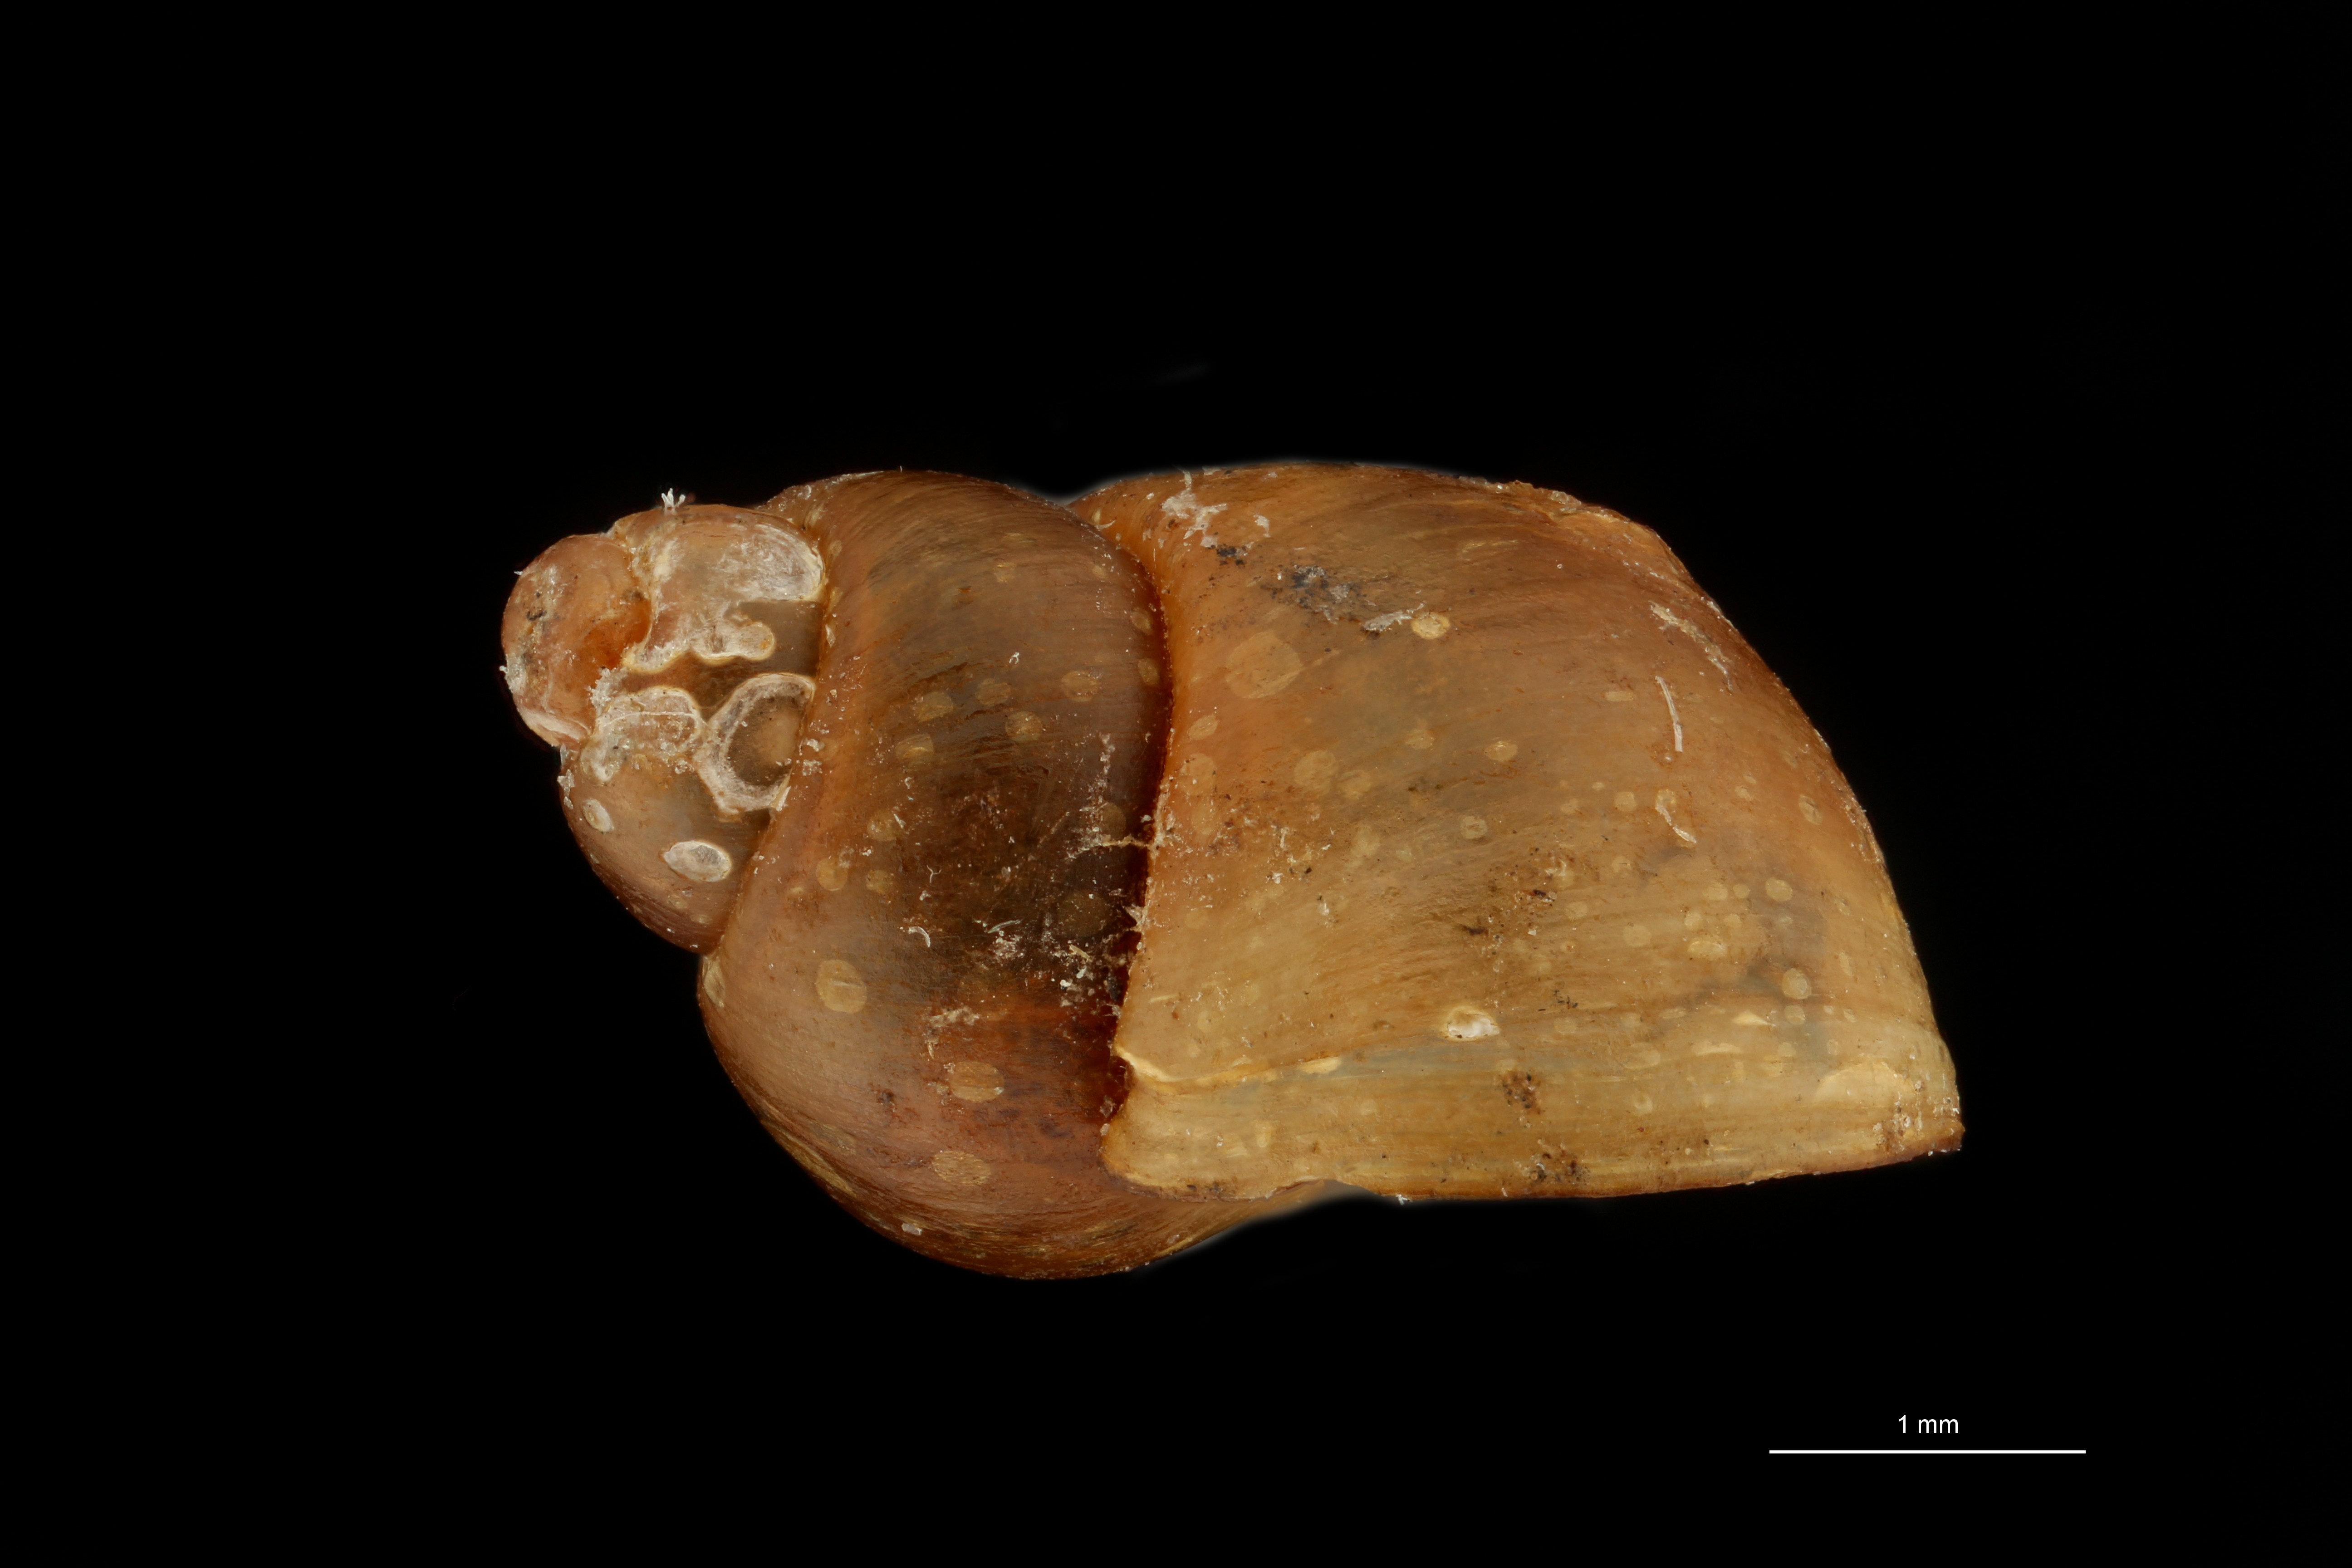 BE-RBINS-INV HOLOTYPE MT 195 Laevilitorina latior LATERAL ZS DMap Scaled.jpg